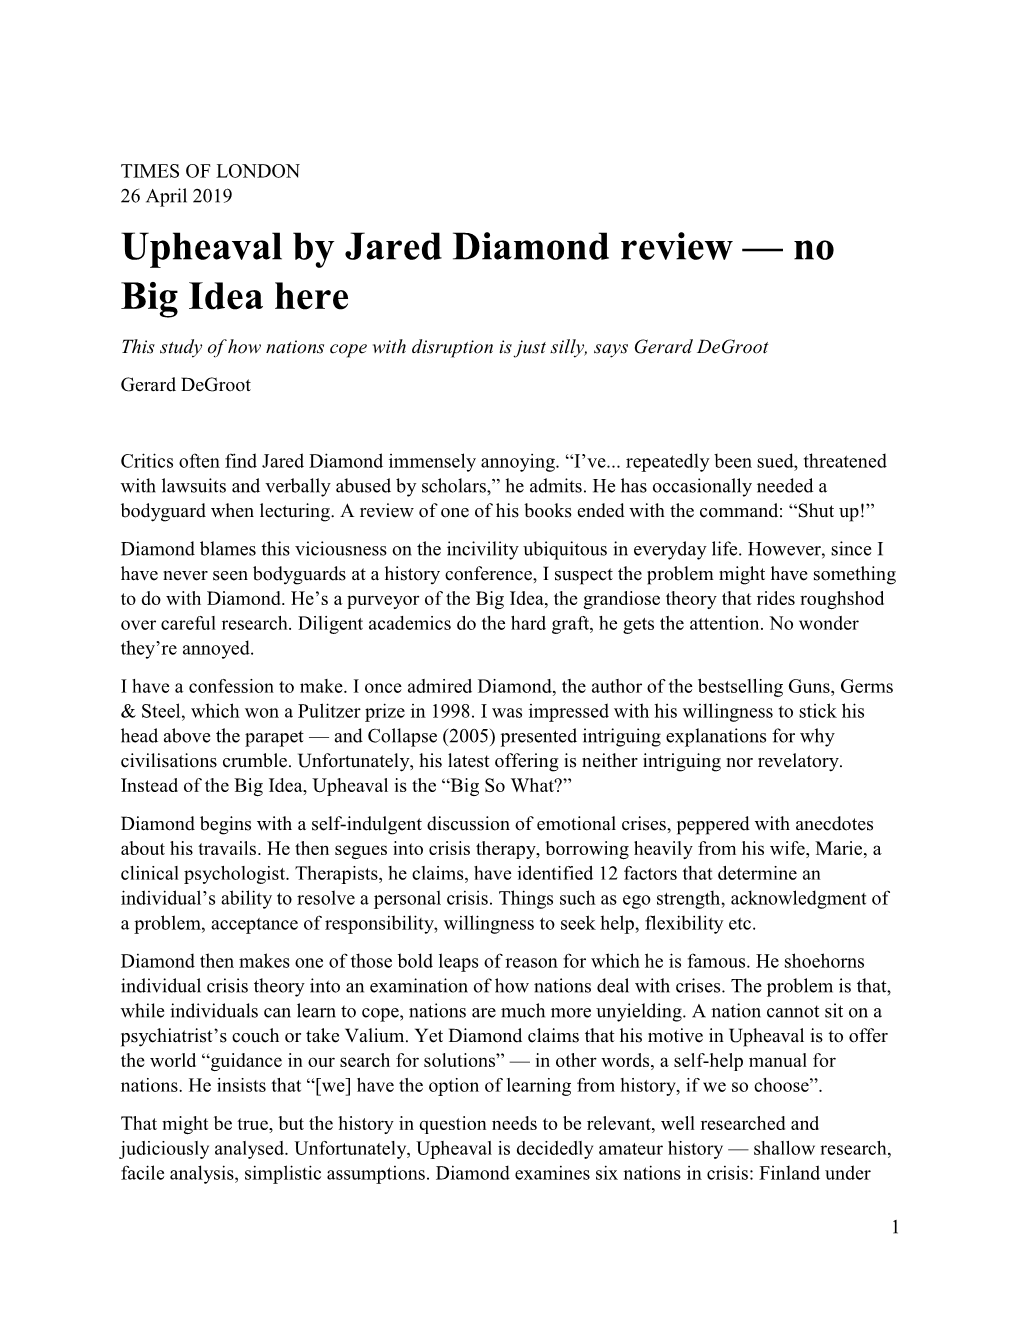 Upheaval by Jared Diamond Review — No Big Idea Here This Study of How Nations Cope with Disruption Is Just Silly, Says Gerard Degroot Gerard Degroot